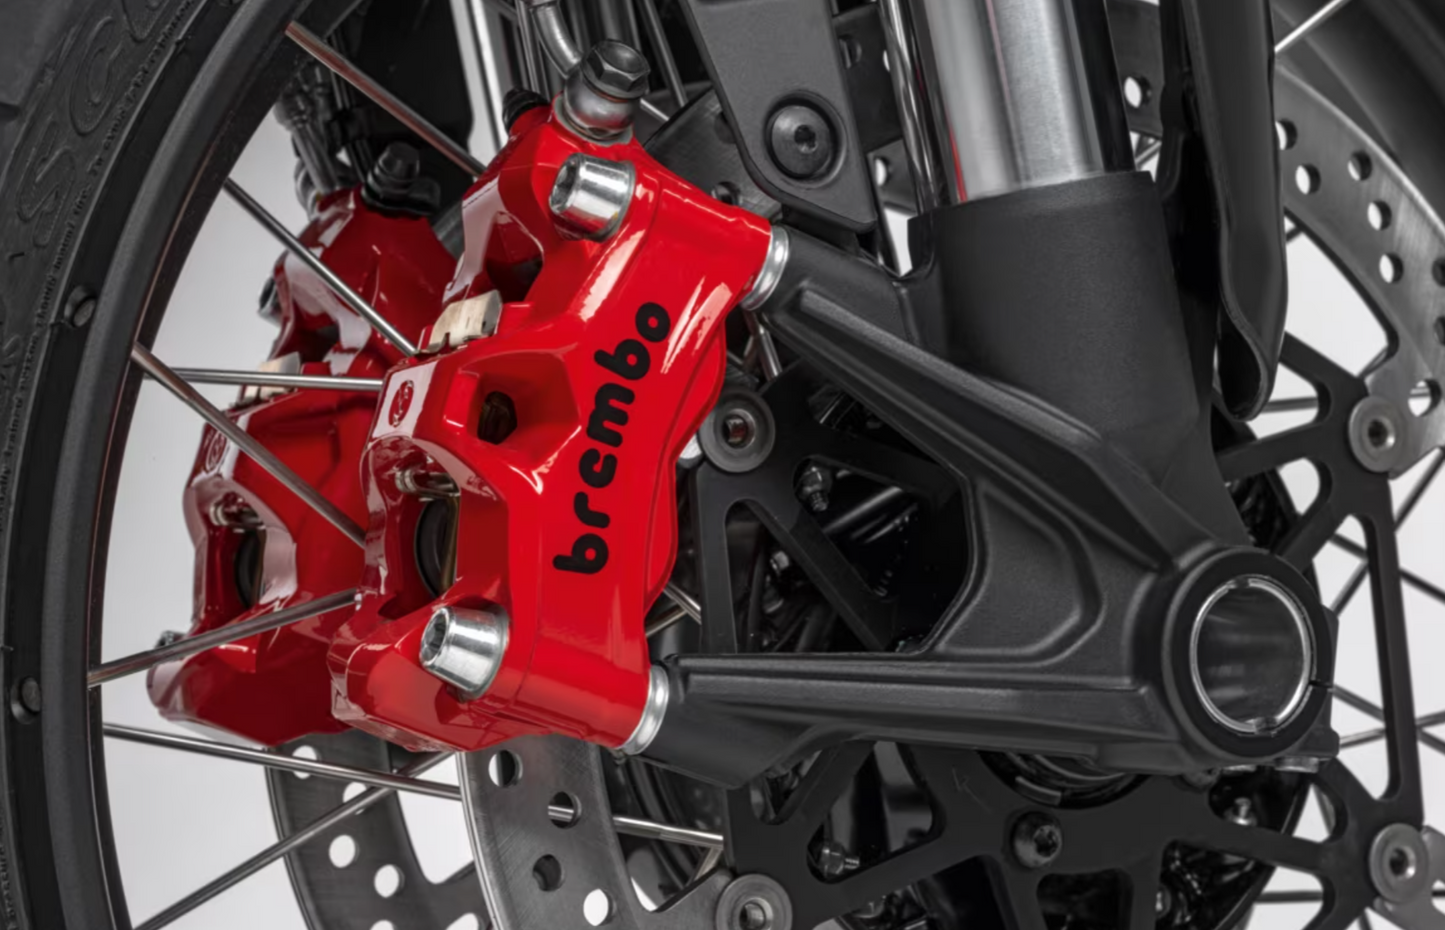 DUCATI Performance brembo STYLEMA Radial Monoblock Color Front Brake Caliper Left and Right Set Red 96180861AB Black 96180861AA